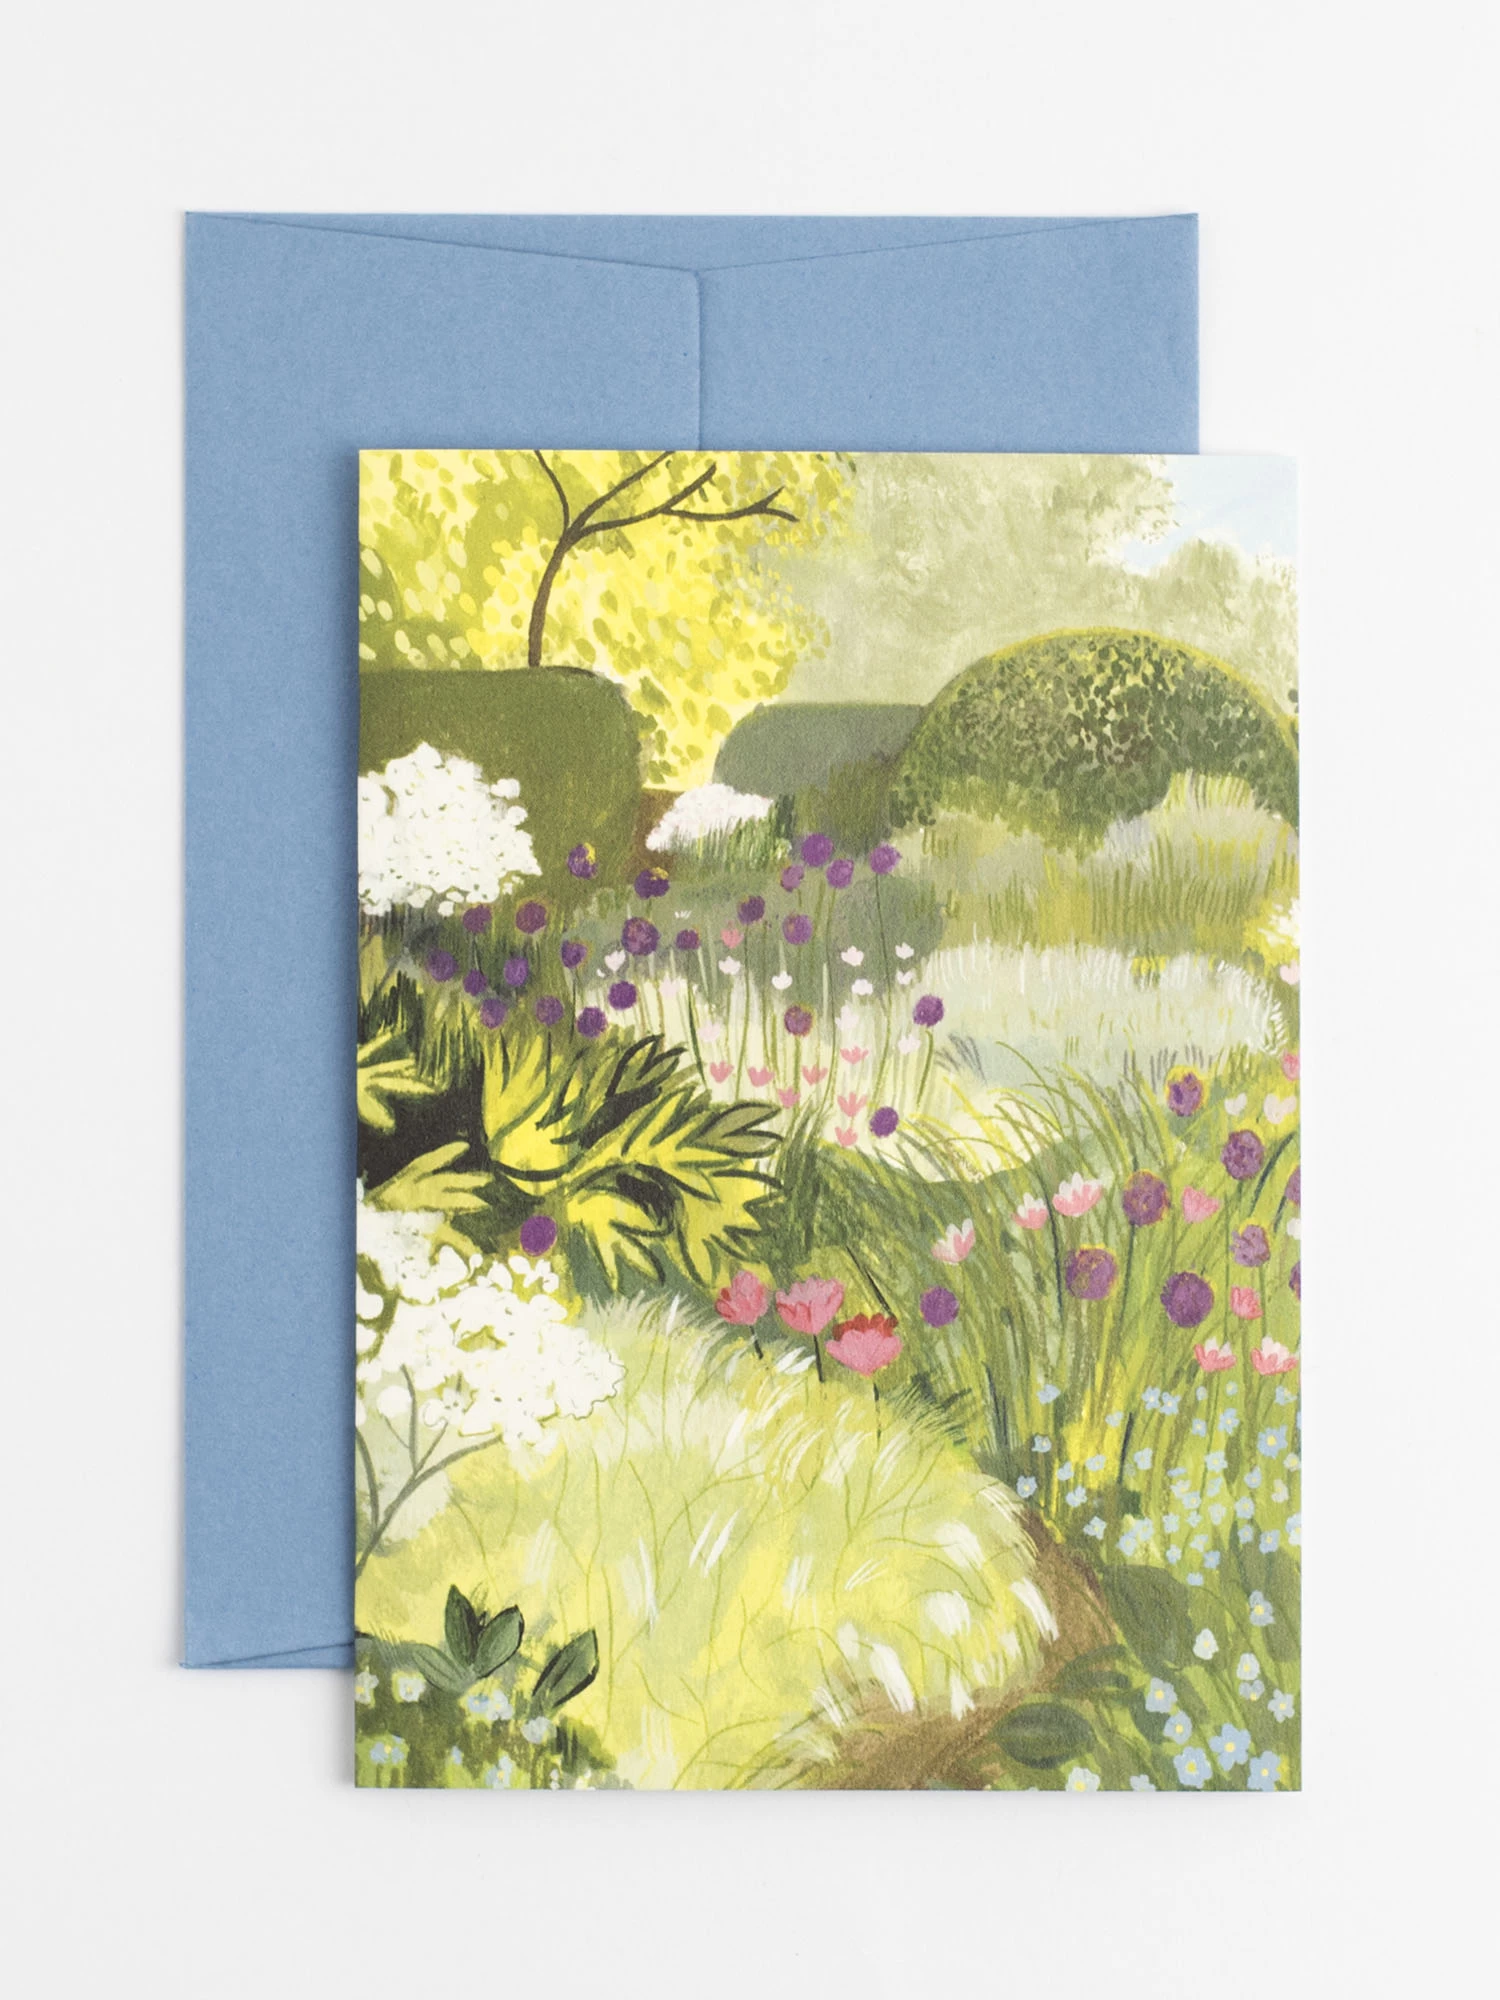 A greetings card featuring an illustration of a garden. The garden is very green and bursting with purple tulips, small bue flowers and frothy white cow parsley in the foreground.